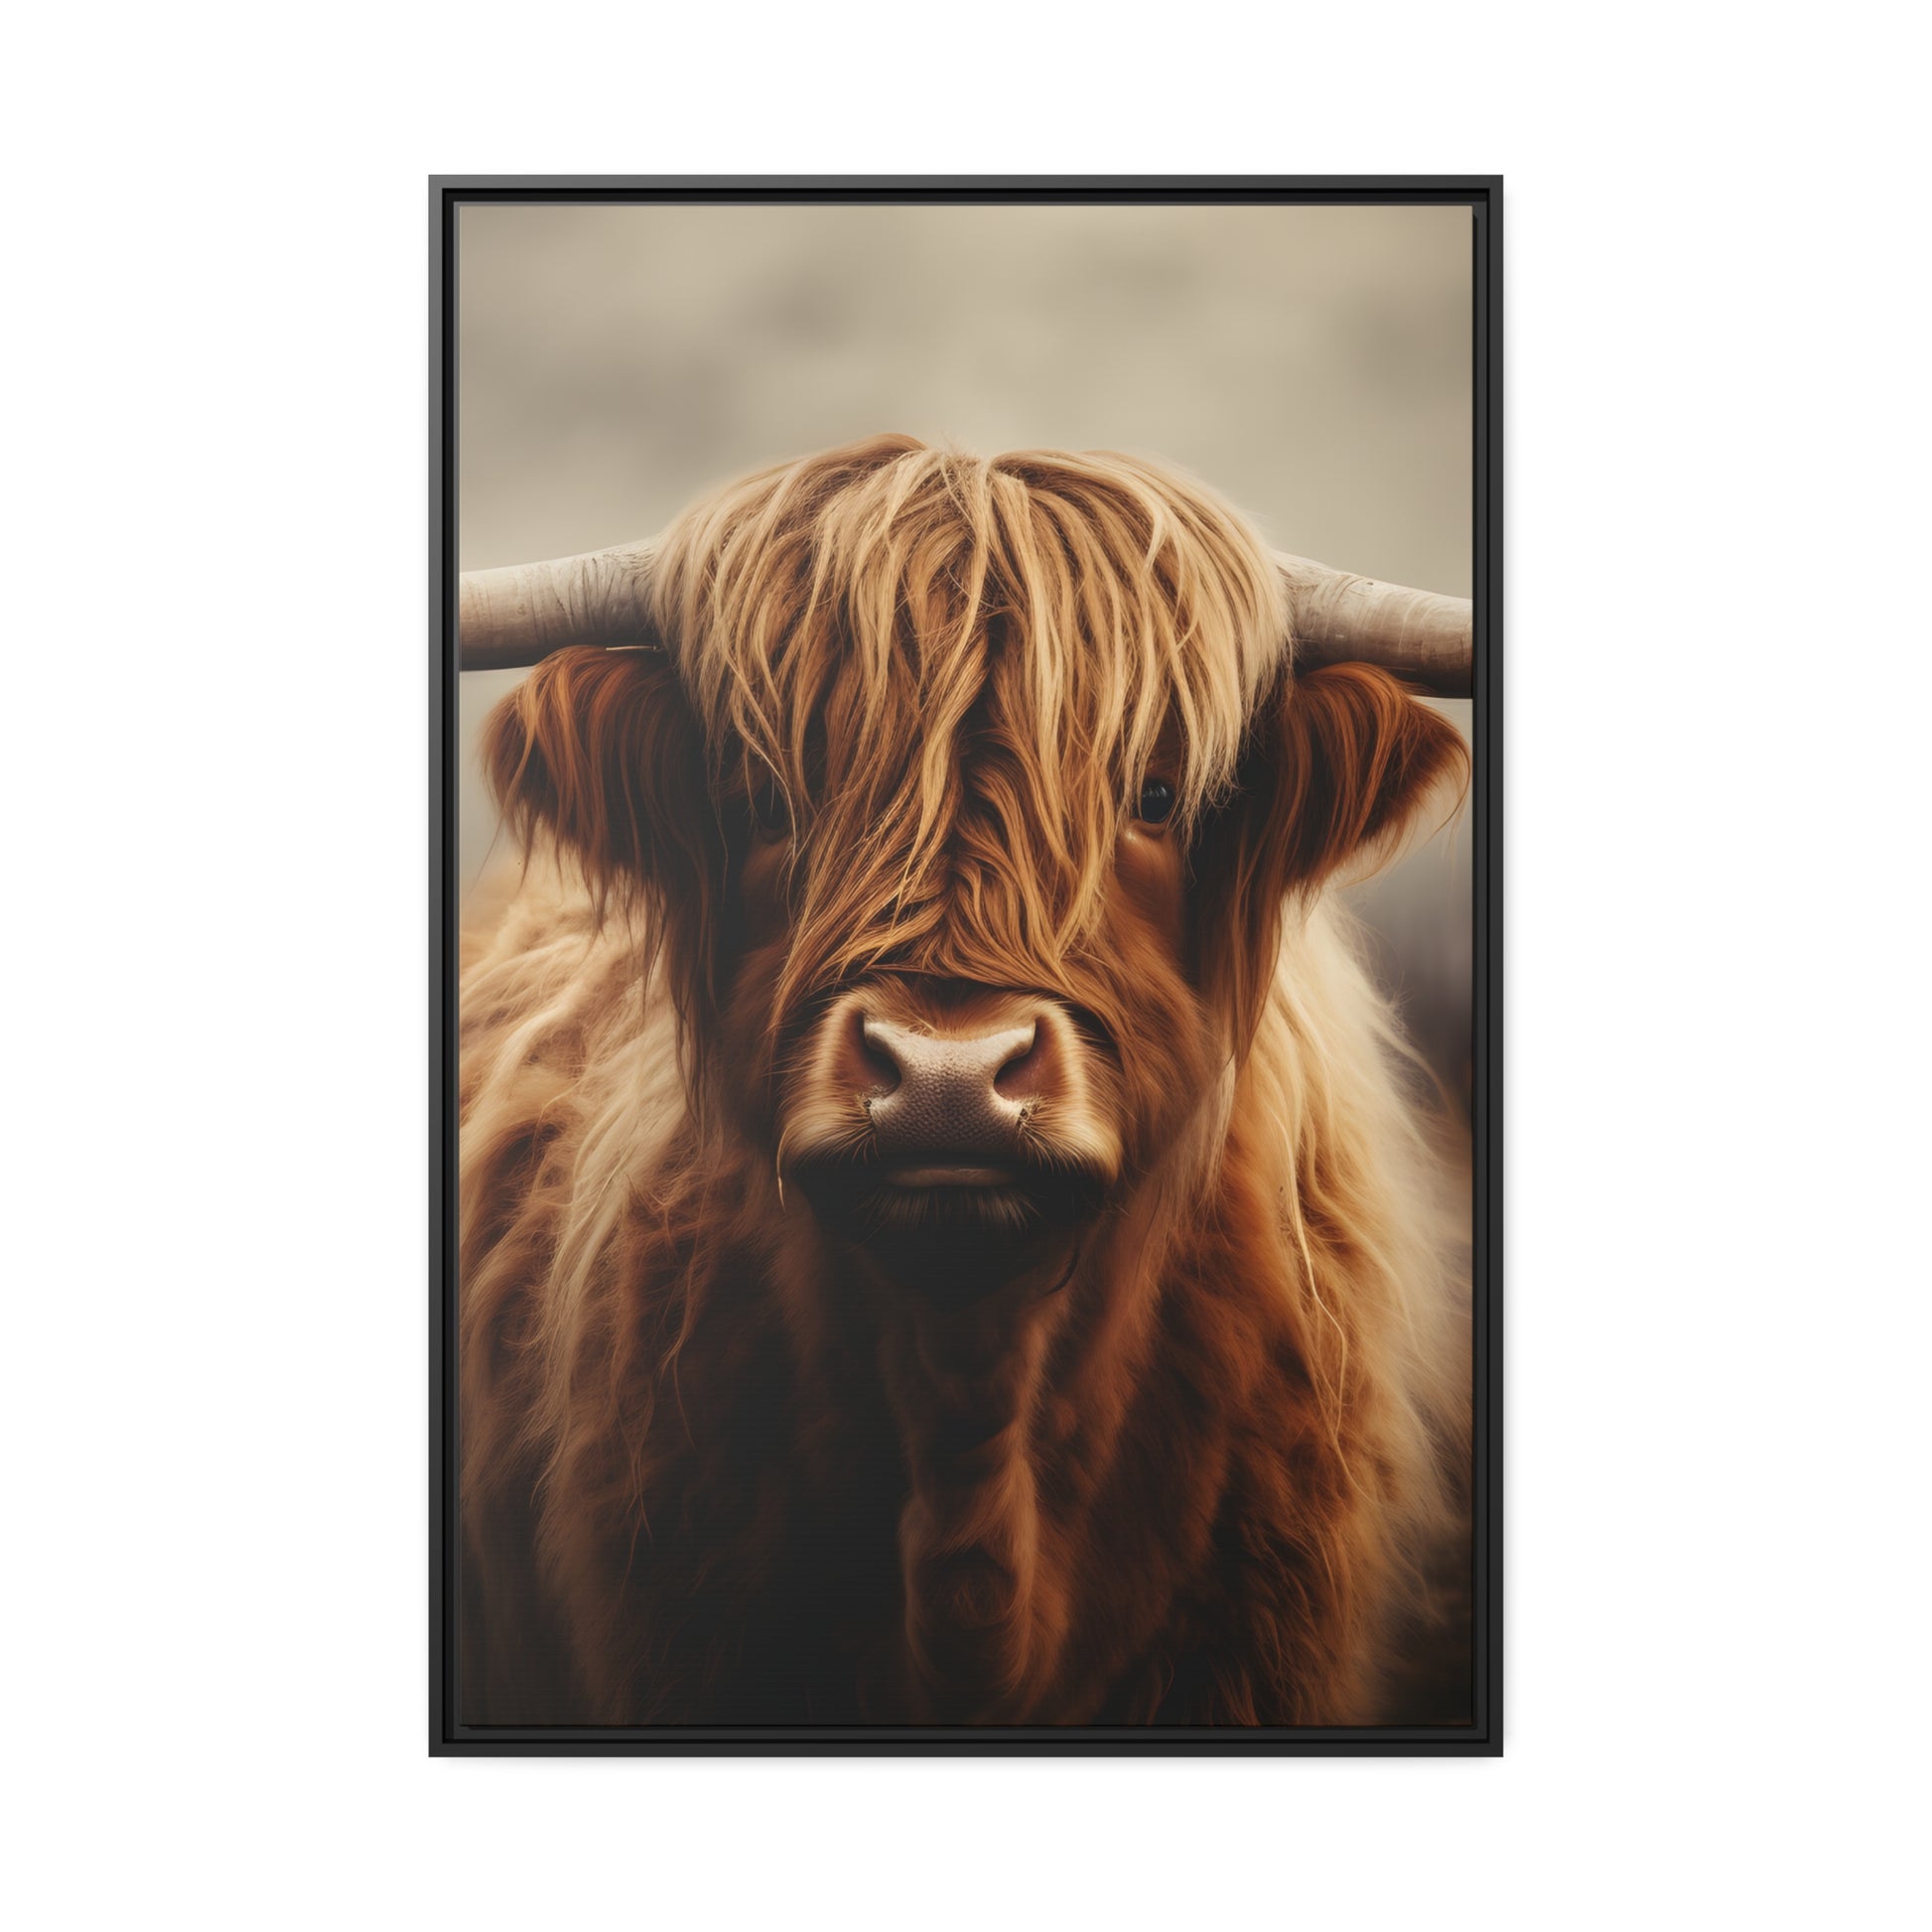 Framed Canvas Artwork Strong Stunning Highlander Bull Warm Fiery Background Emotional Staring Into The Viewer Captivating Highly Detailed Painting Style Perfect To Warm Up A Homestead Or Country Home